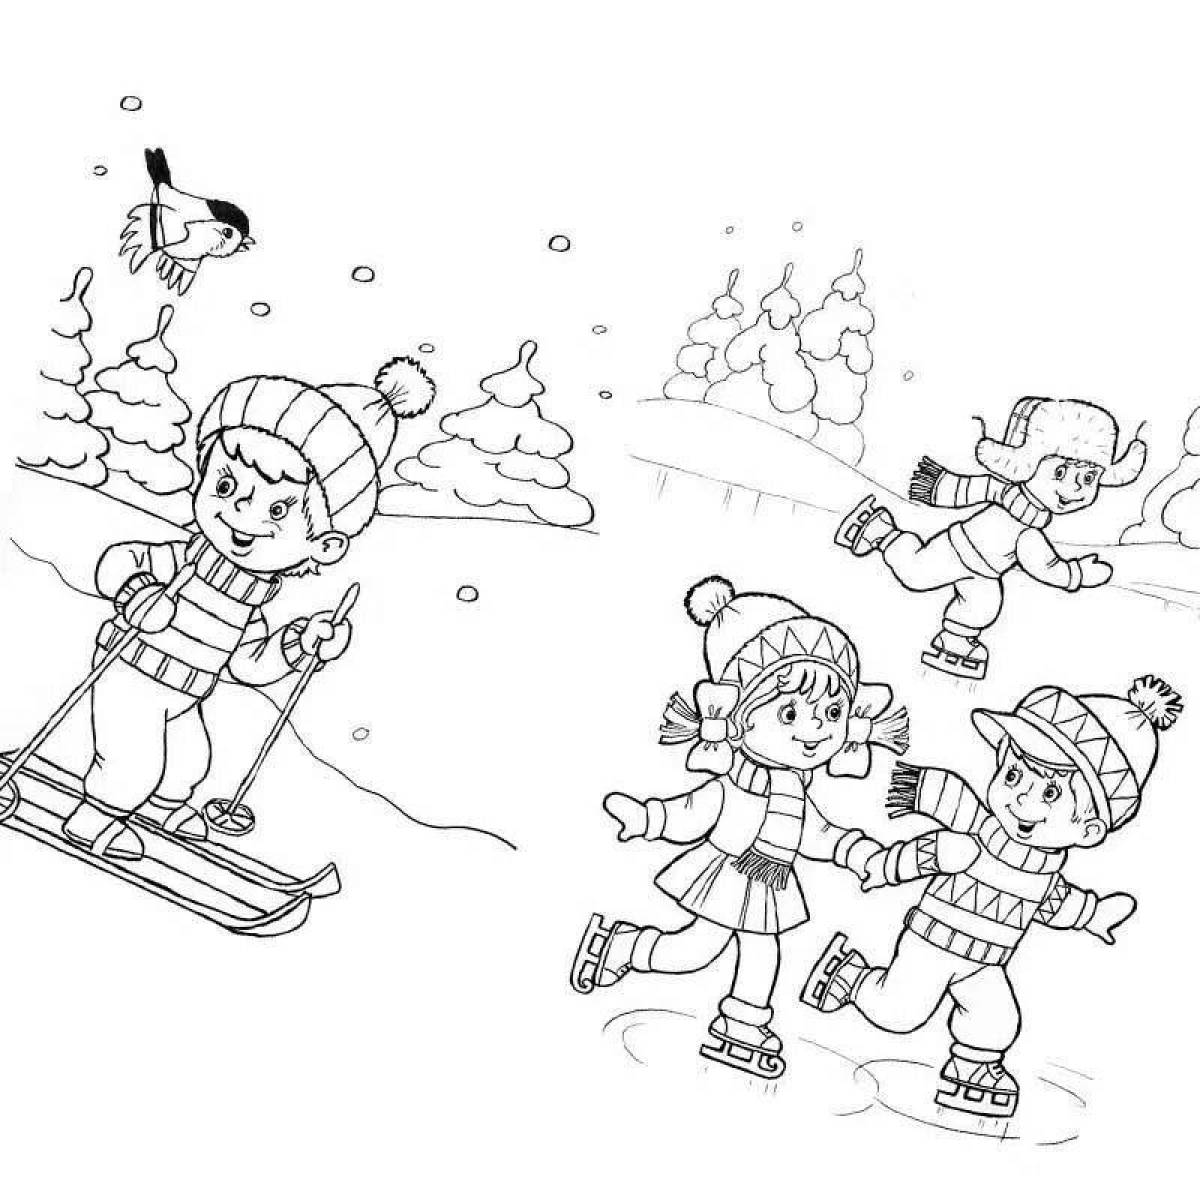 Awesome winter sports coloring page